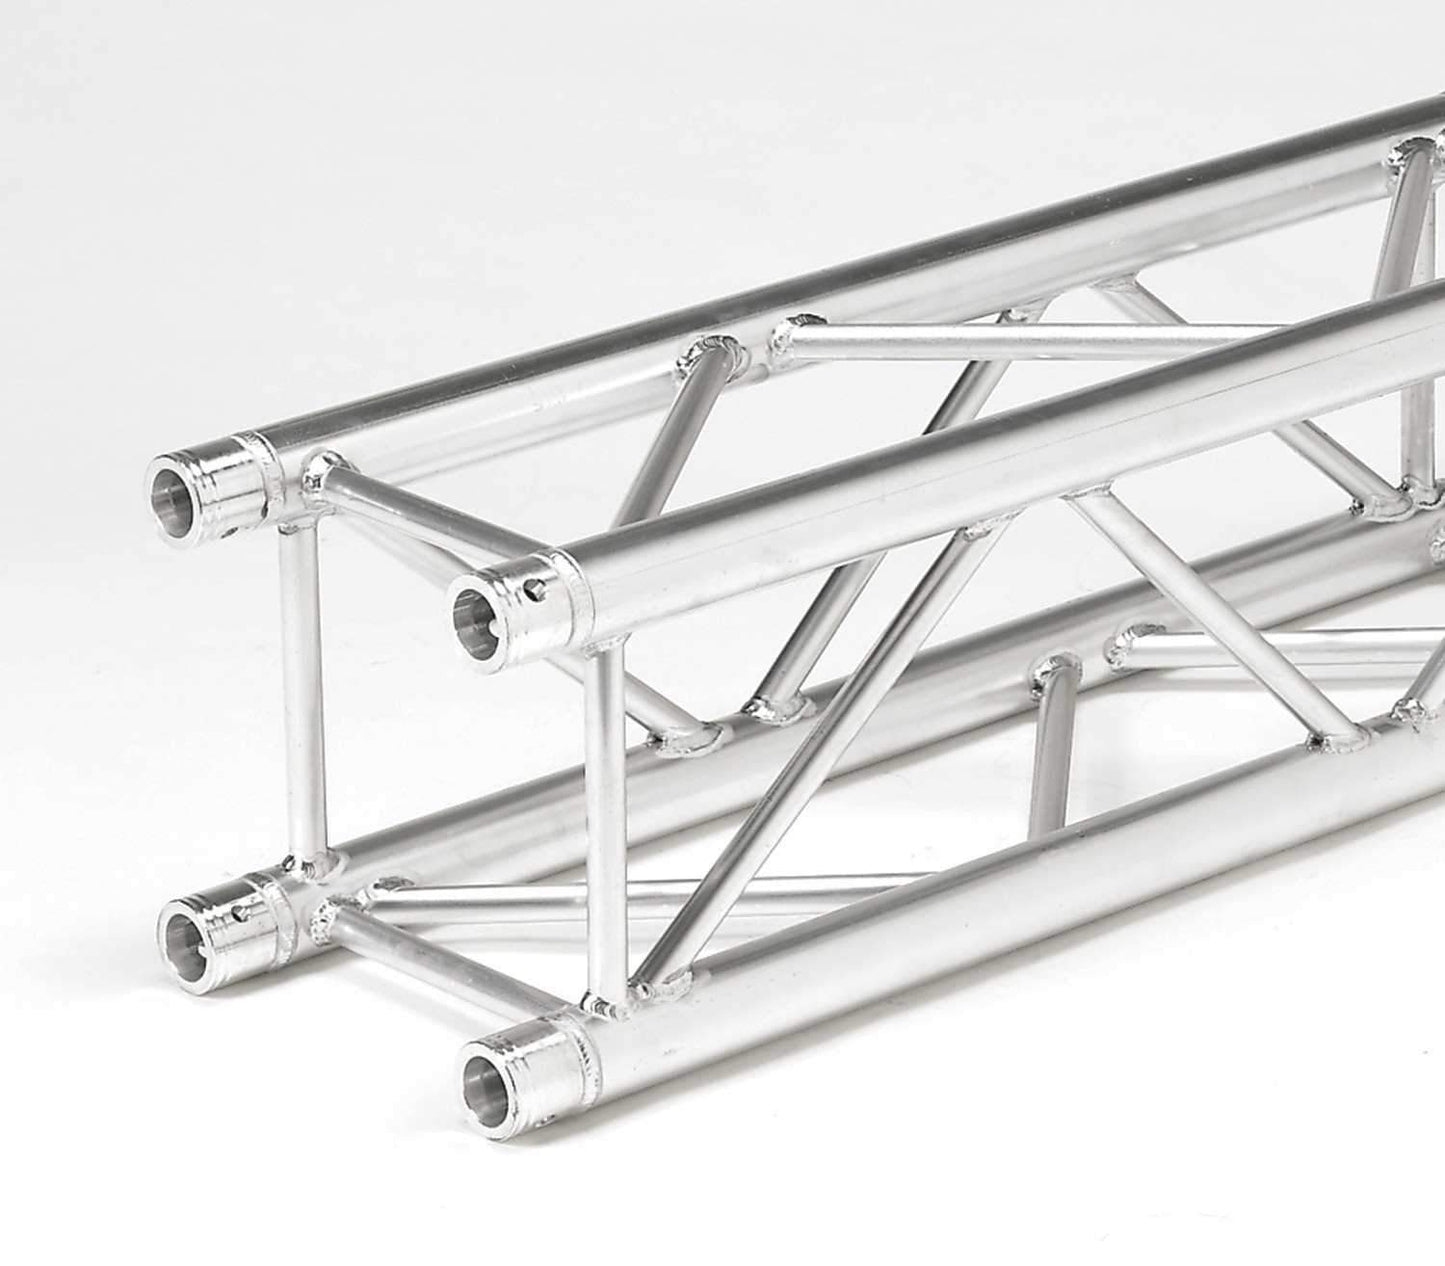 Global Truss ST-132 Crank Stand F34 12.7 Ft Truss Pack - PSSL ProSound and Stage Lighting